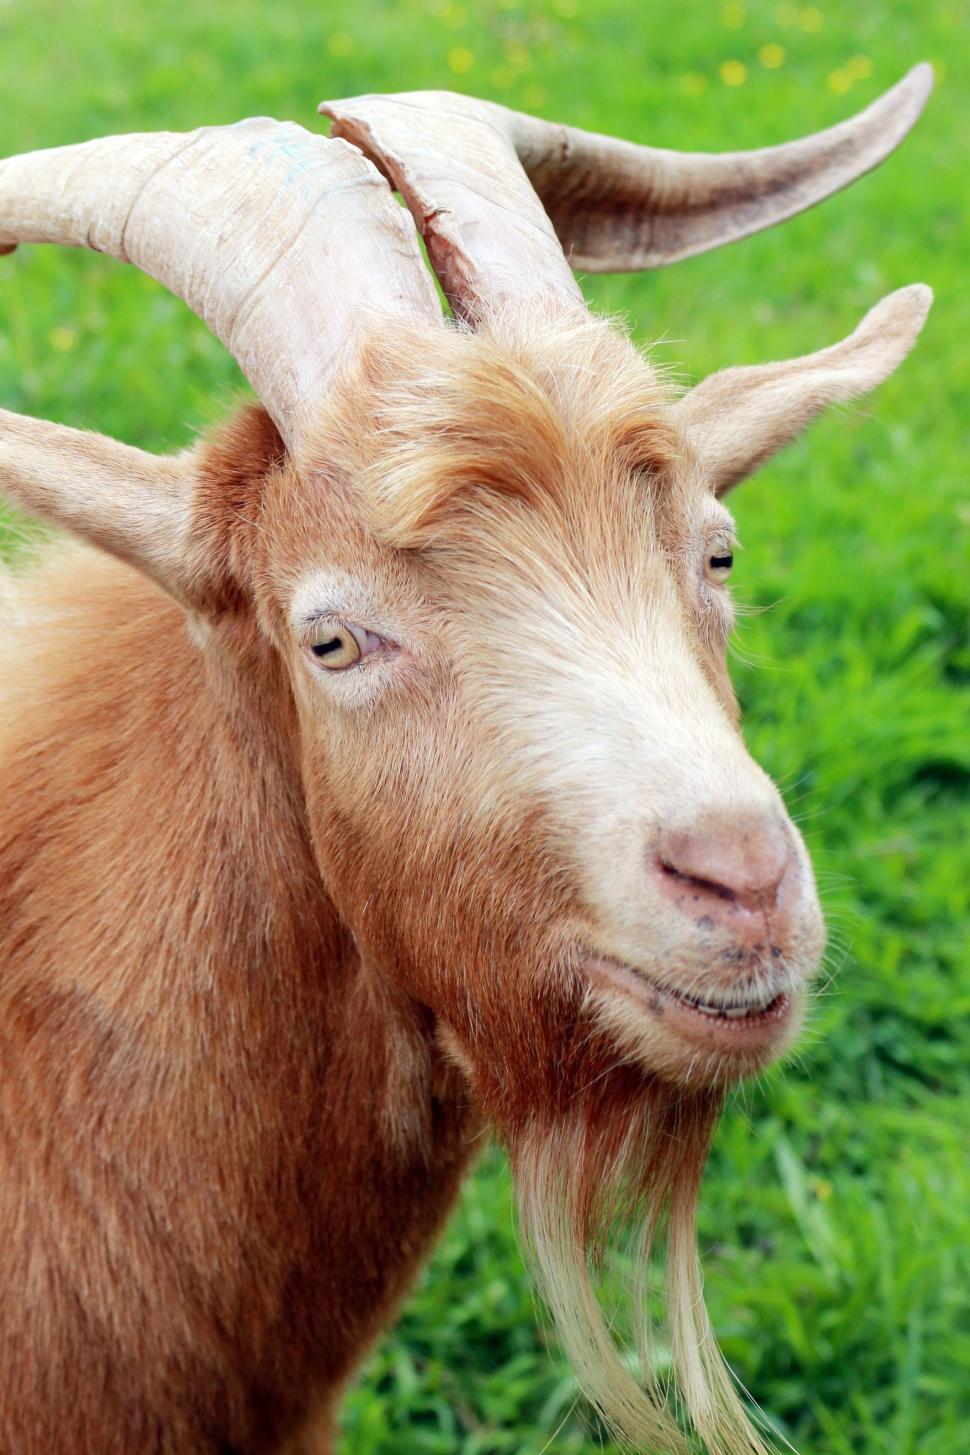 Free Image of Goat with Beard  